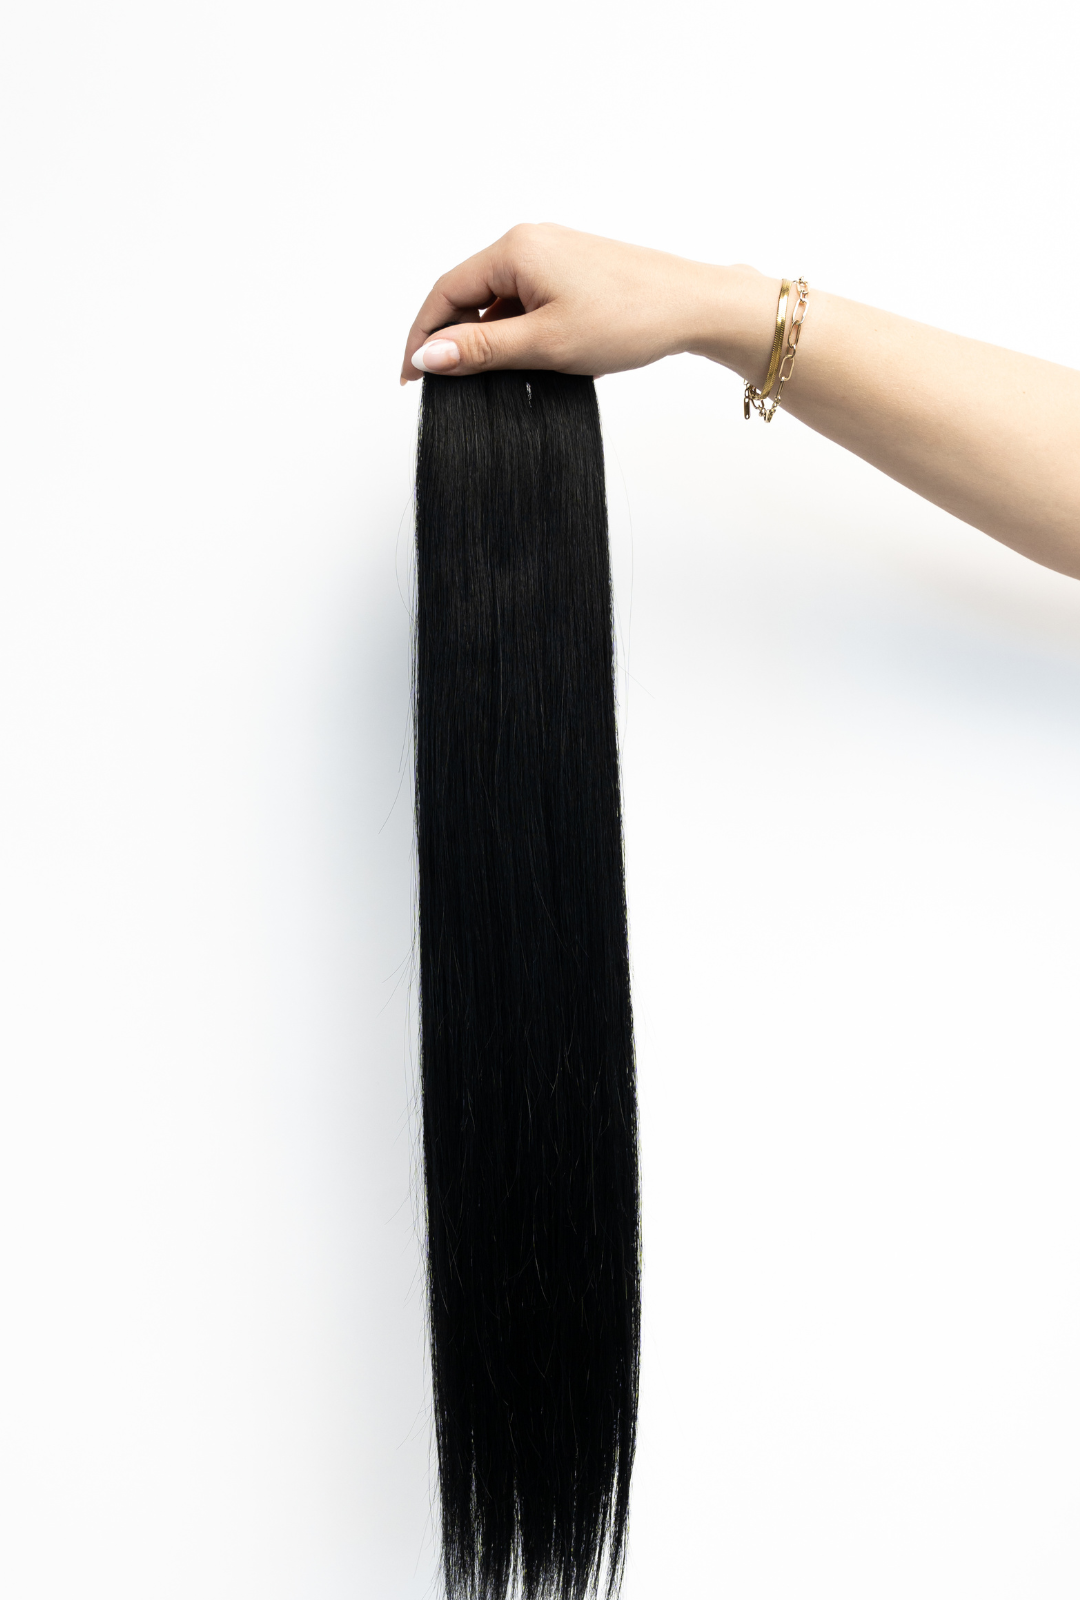 Laced Hair Machine Sewn Weft Extensions #1 (Black Noir)